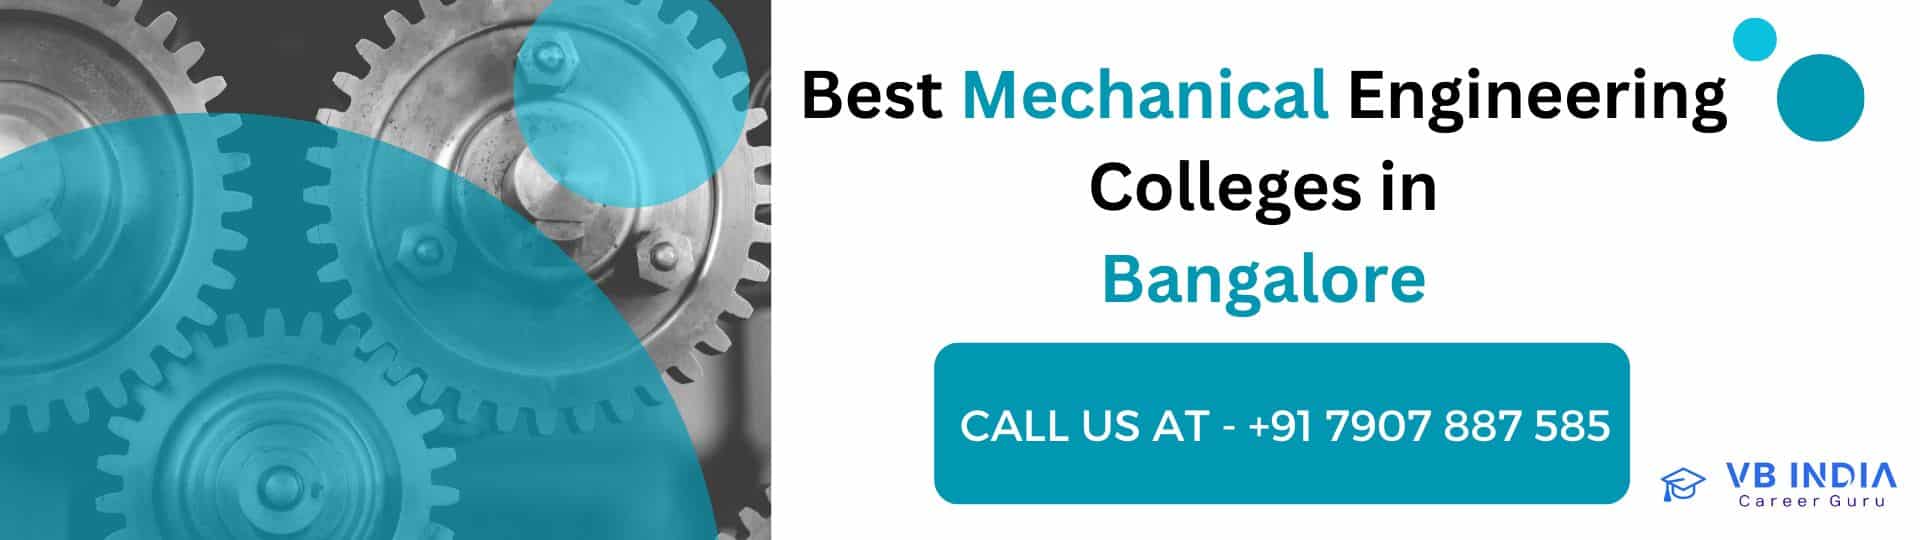 best mechanical engineering colleges in bangalore